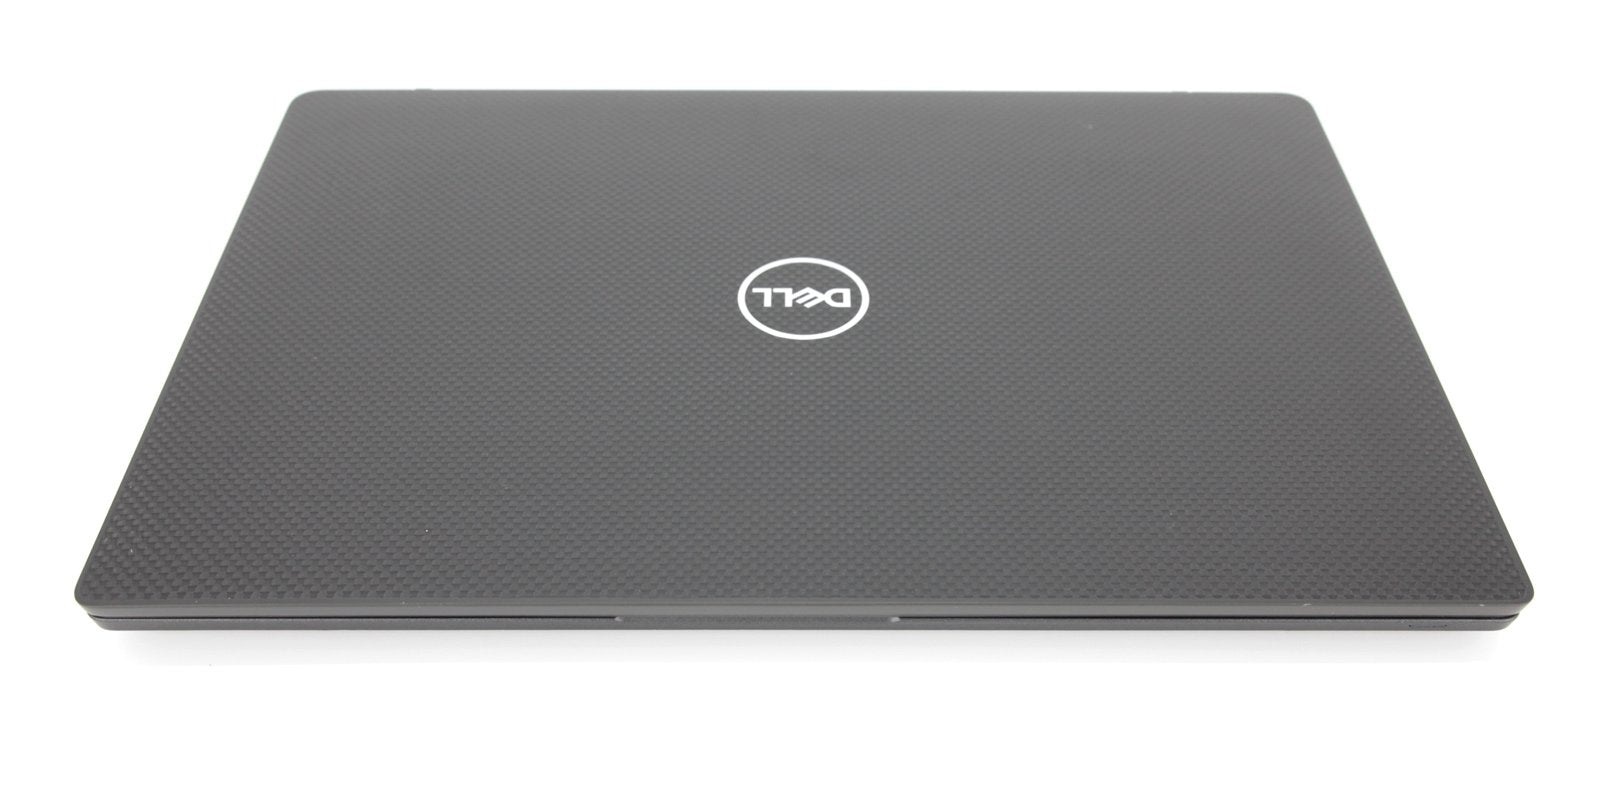 Dell Latitude 7400 14" Laptop (2019): Core i7 16GB RAM 256GB 1.36Kg (After 7490) - CruiseTech